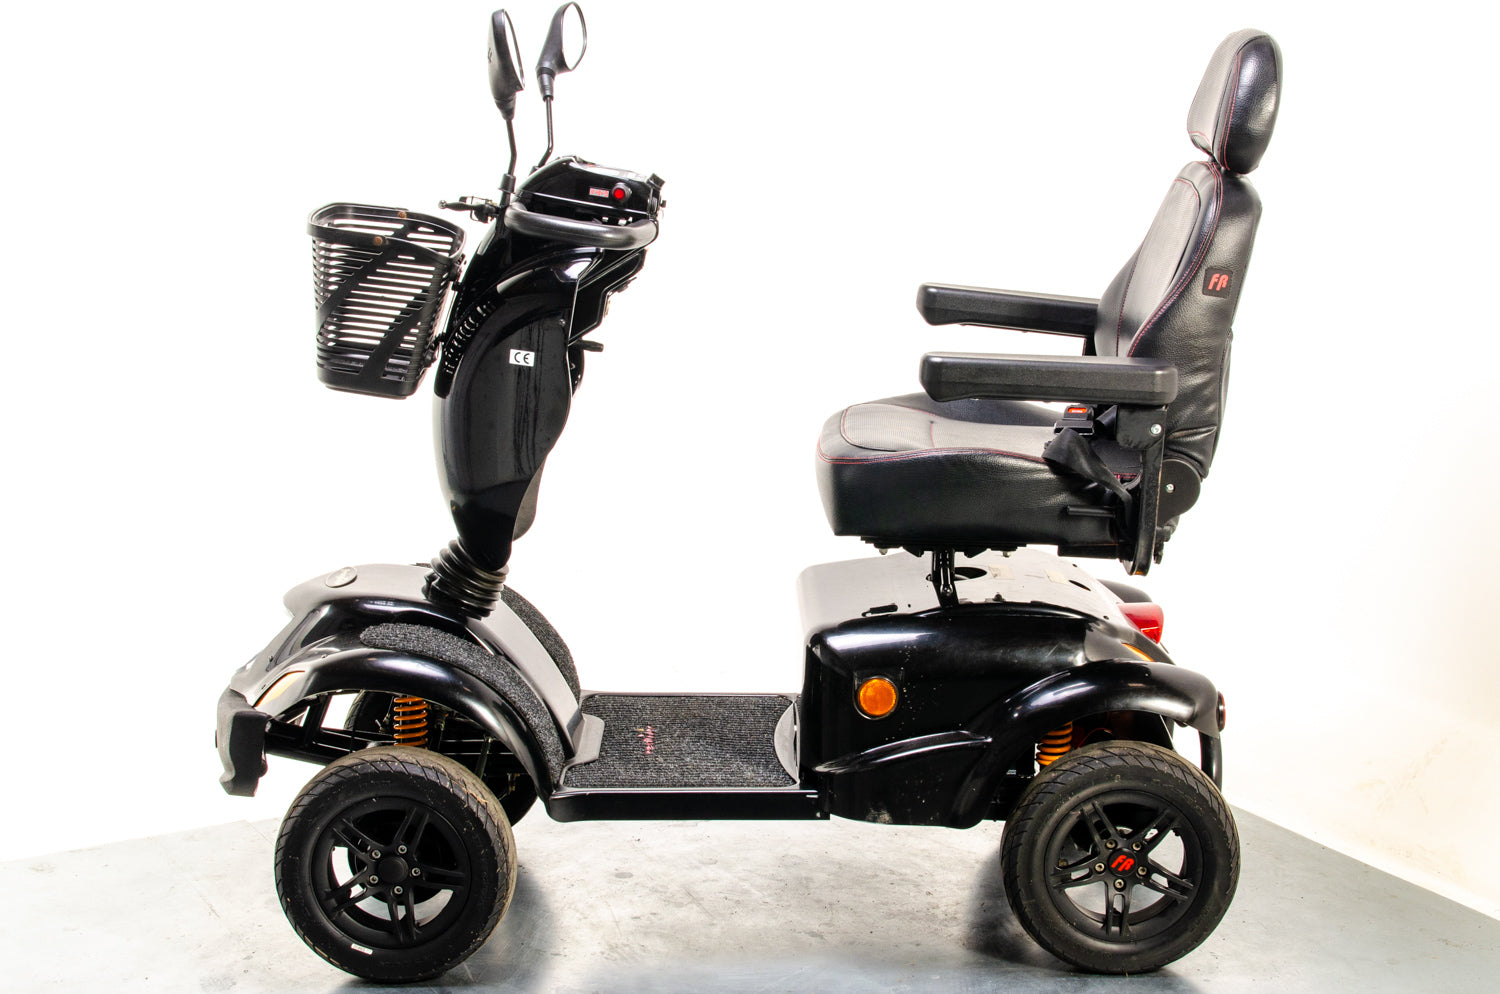 Freerider Landranger XL8 8mph Used Mobility Scooter All-Terrain Off-Road Road Legal Huge 13066